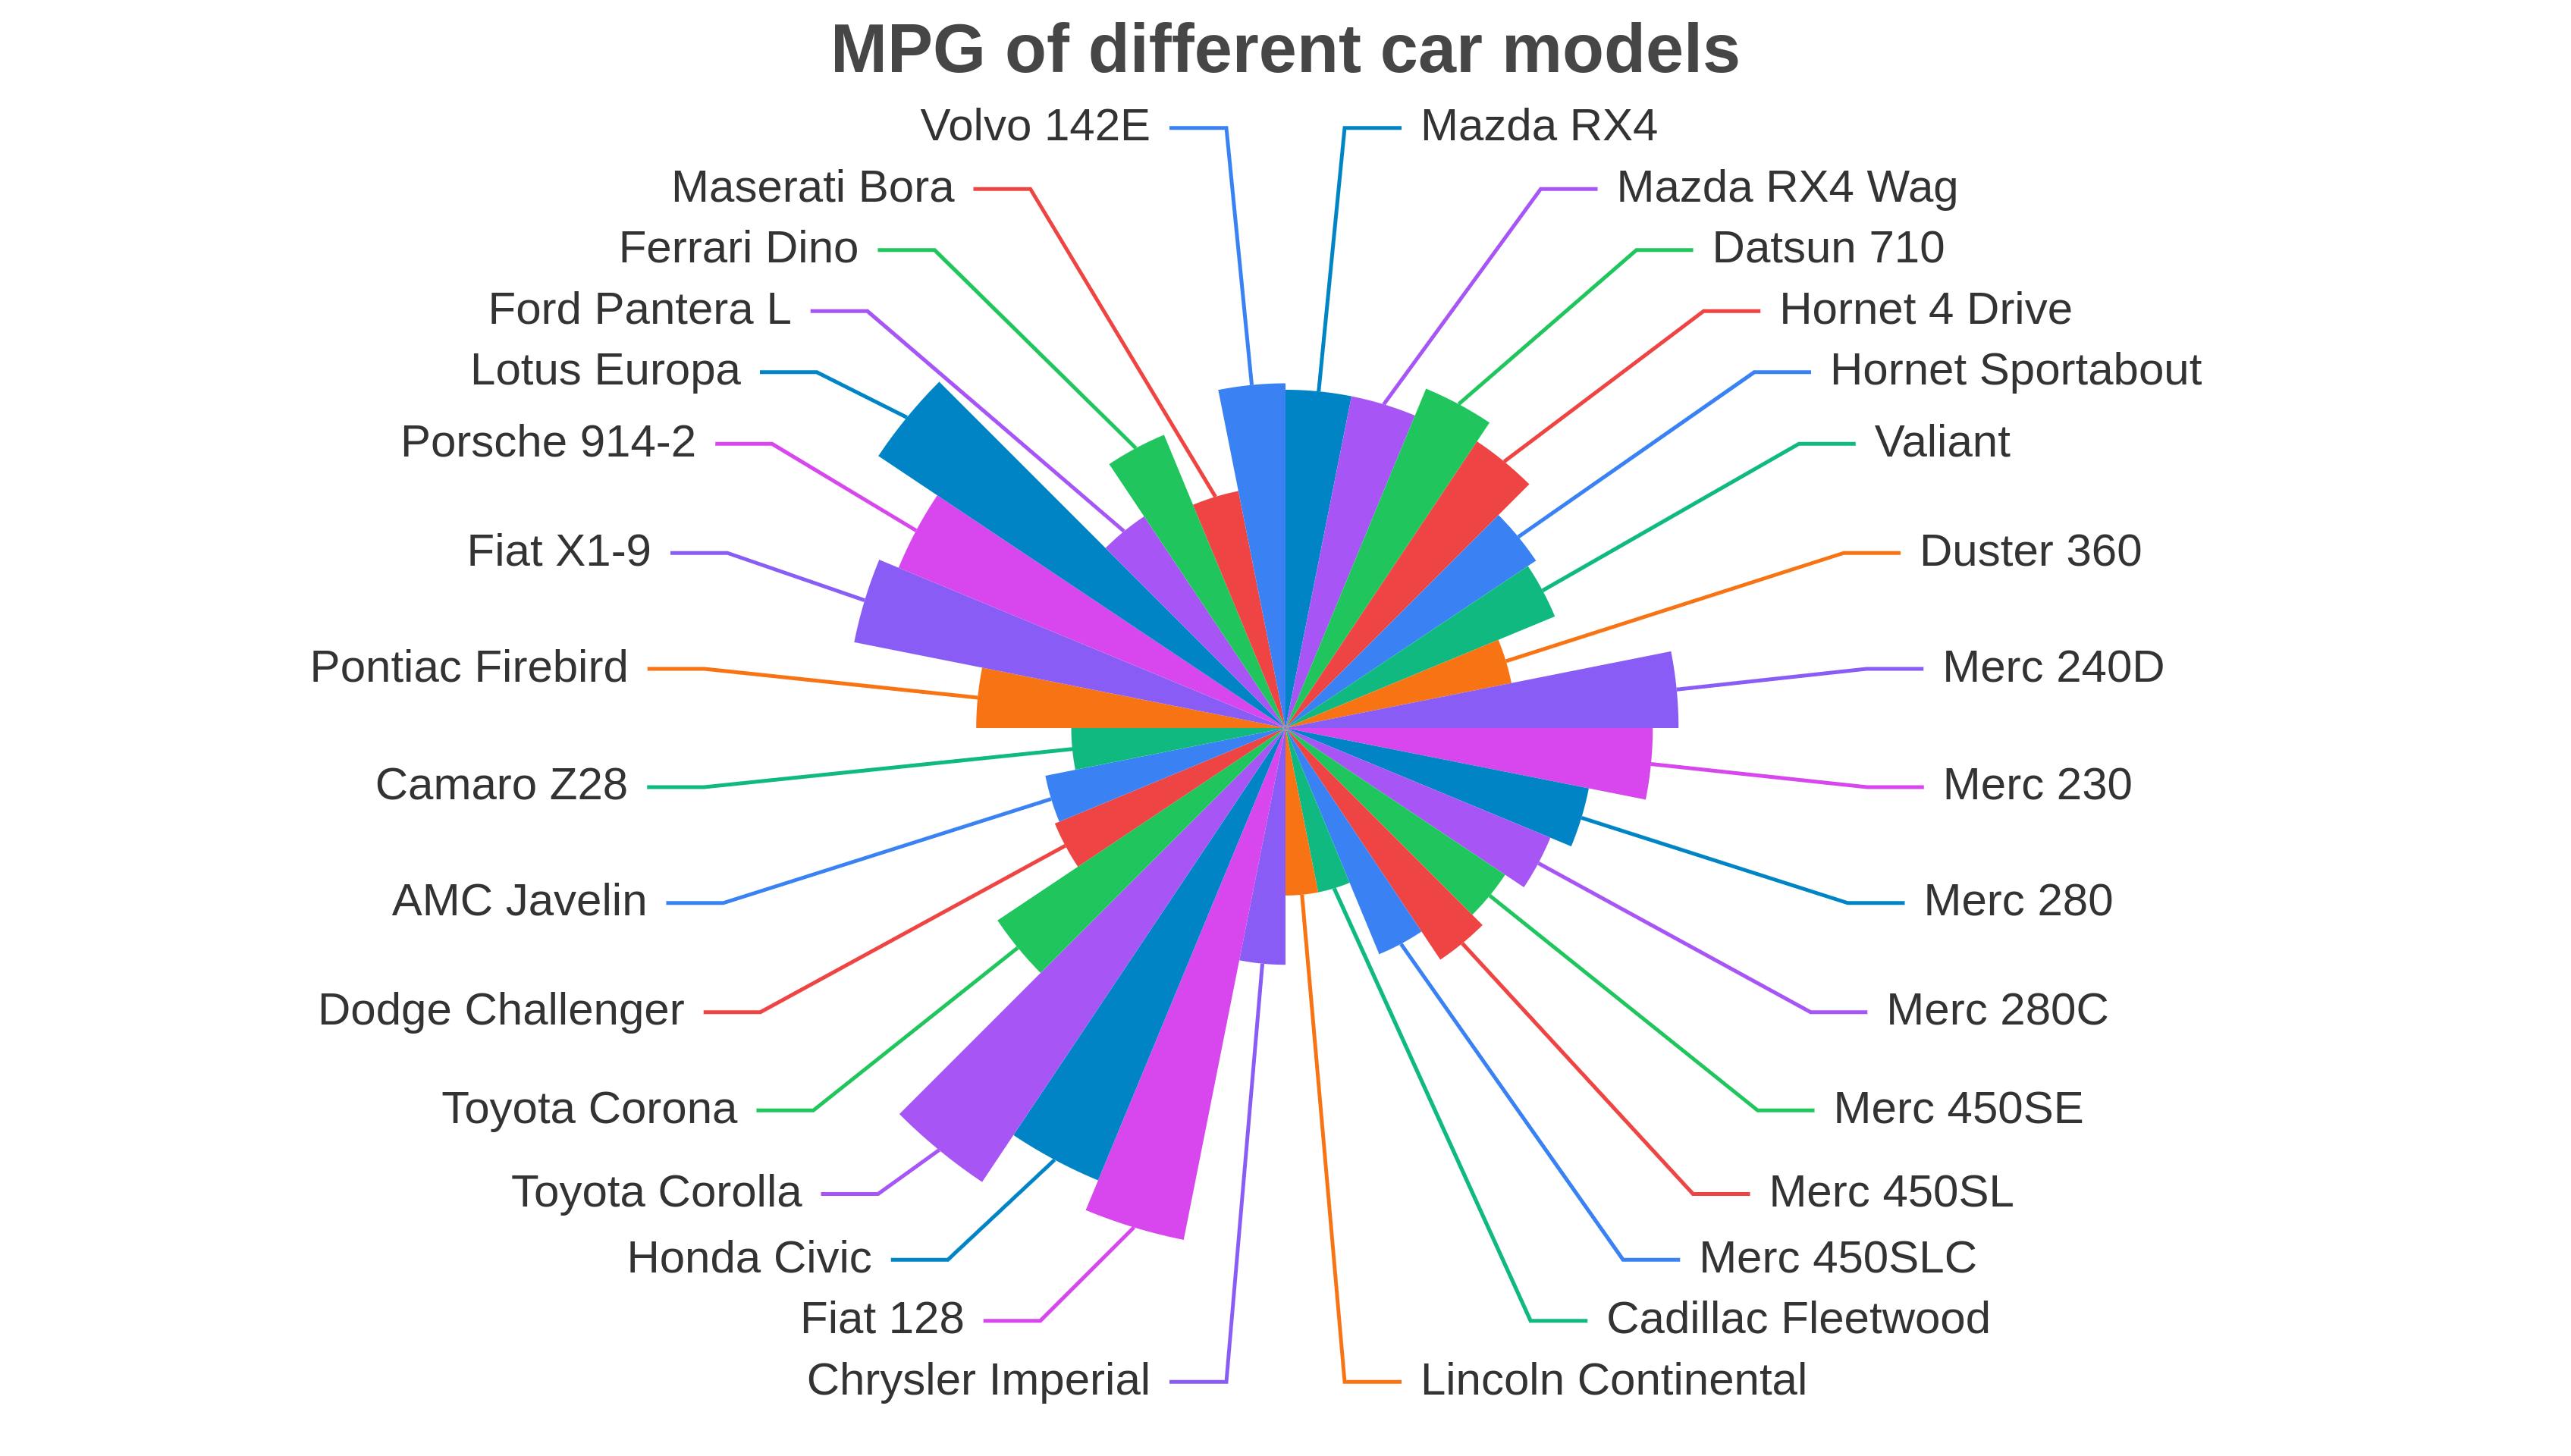 Nightingale chart showing mpg of different car models.